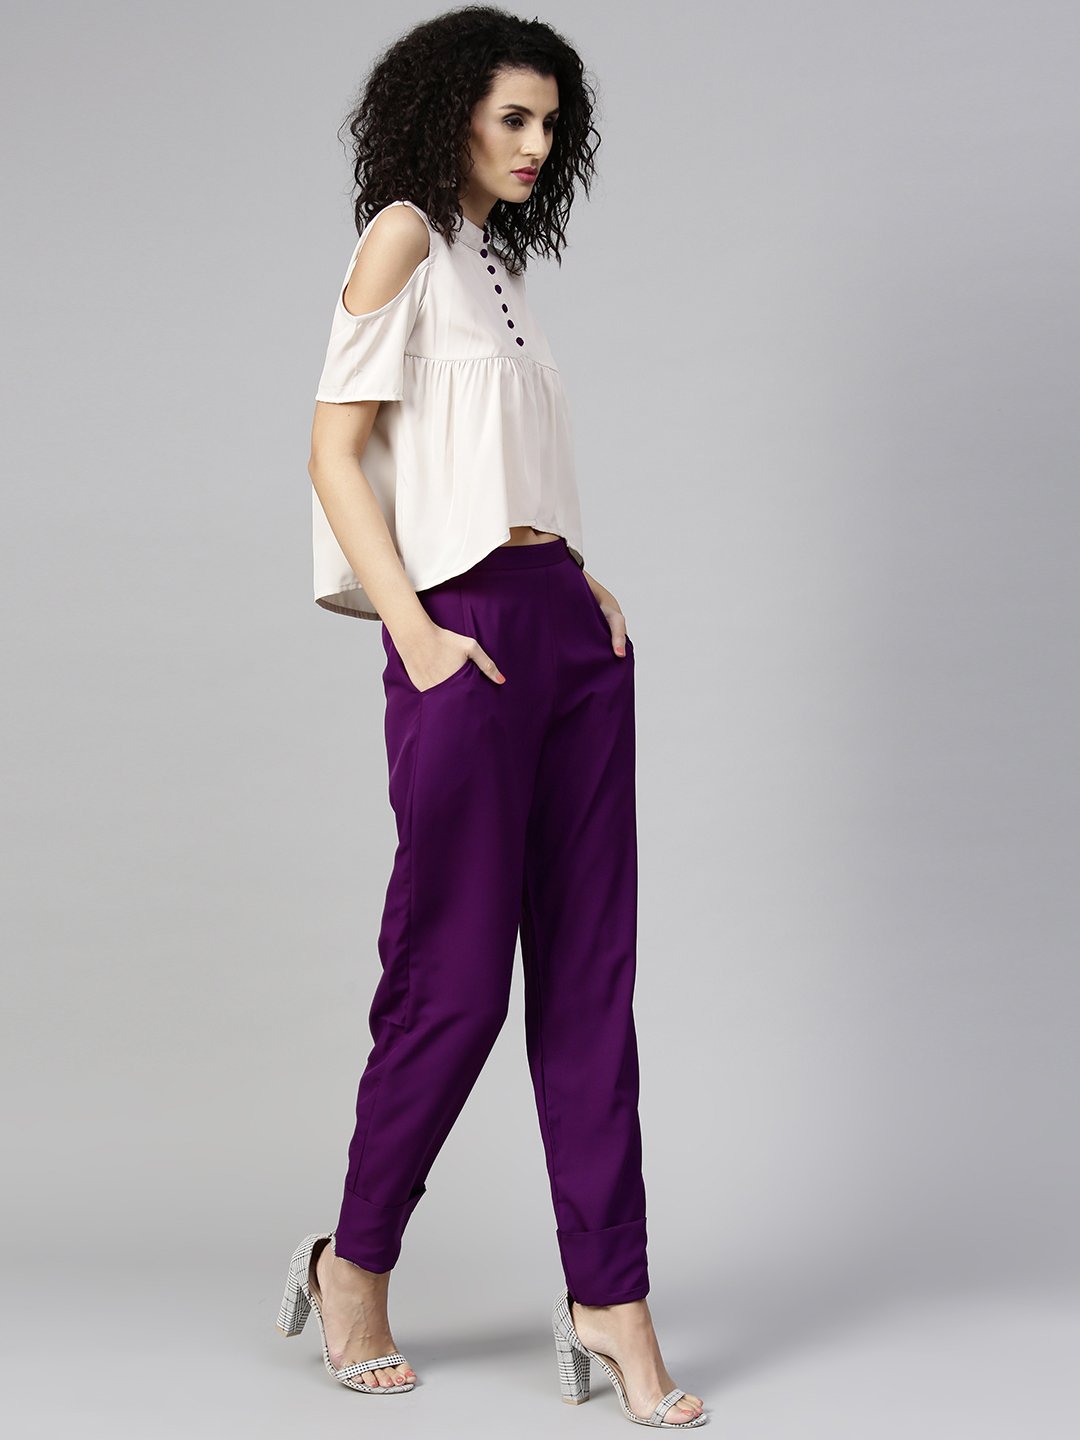 Women's Off-White & Purple Solid Top With Trousers - Nayo Clothing